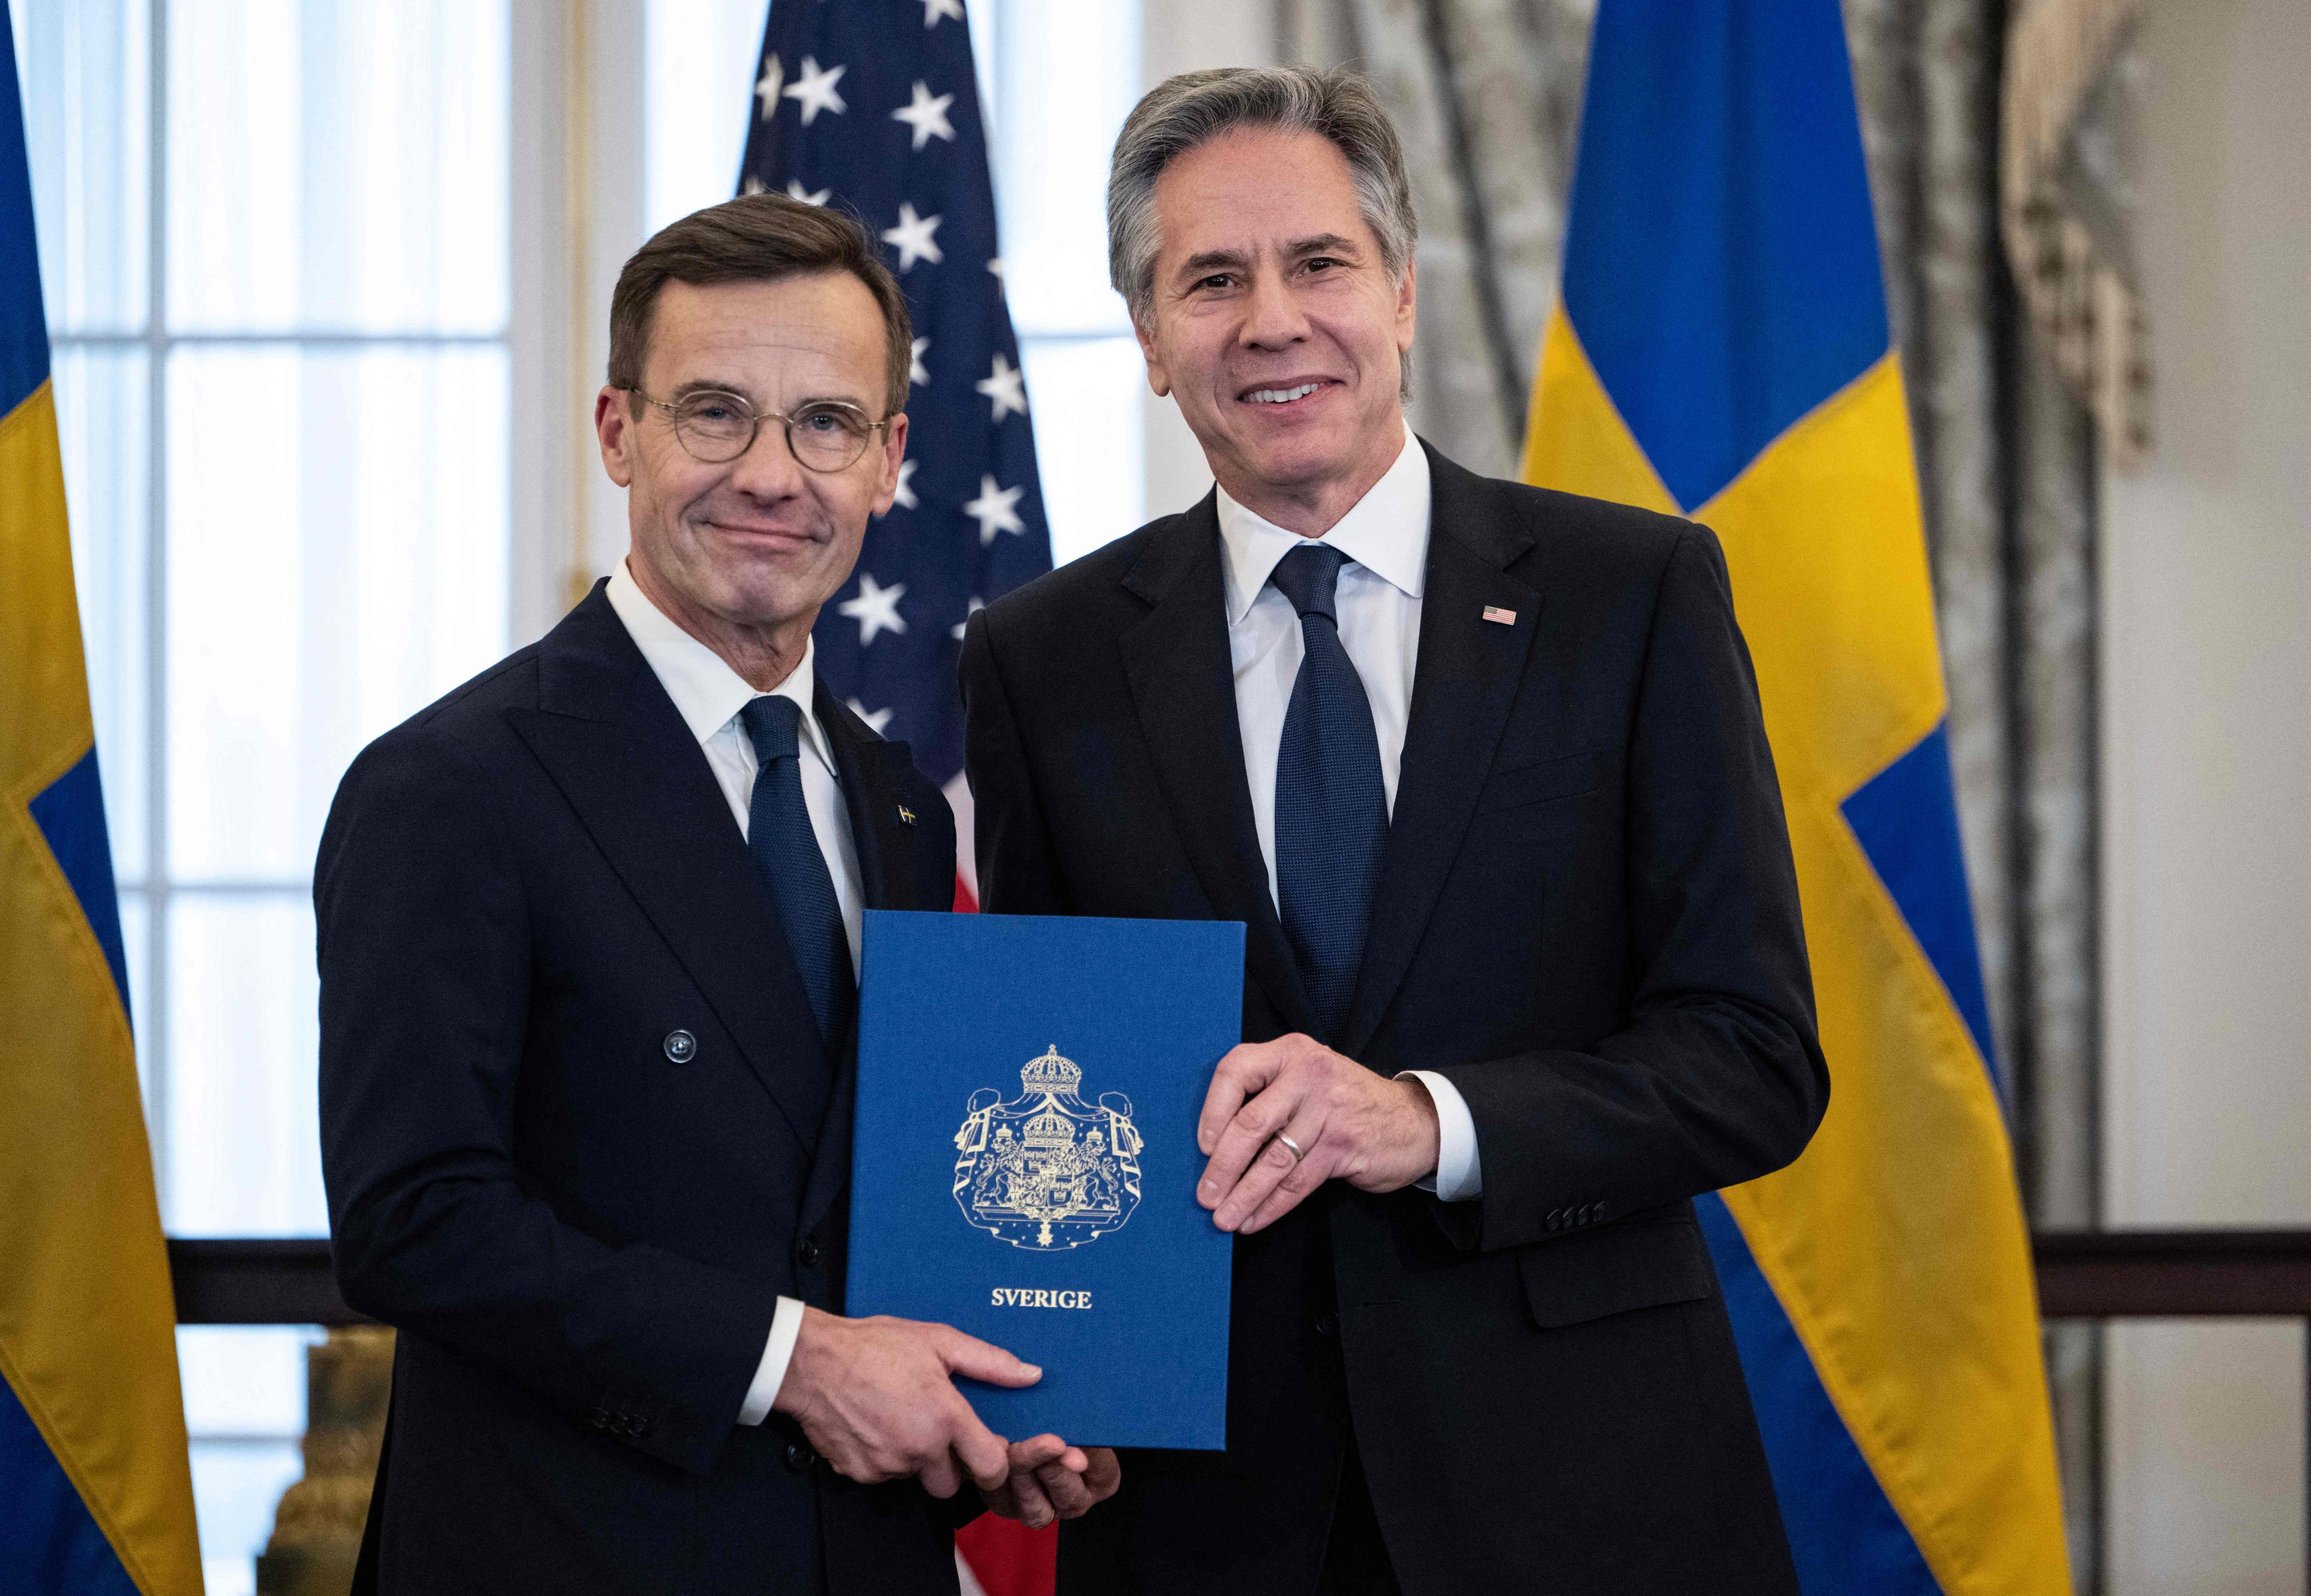 US Secretary of State Antony Blinken receives the Nato ratification documents from Swedish Prime Minister Ulf Kristersson in Washington. Photo: AFP